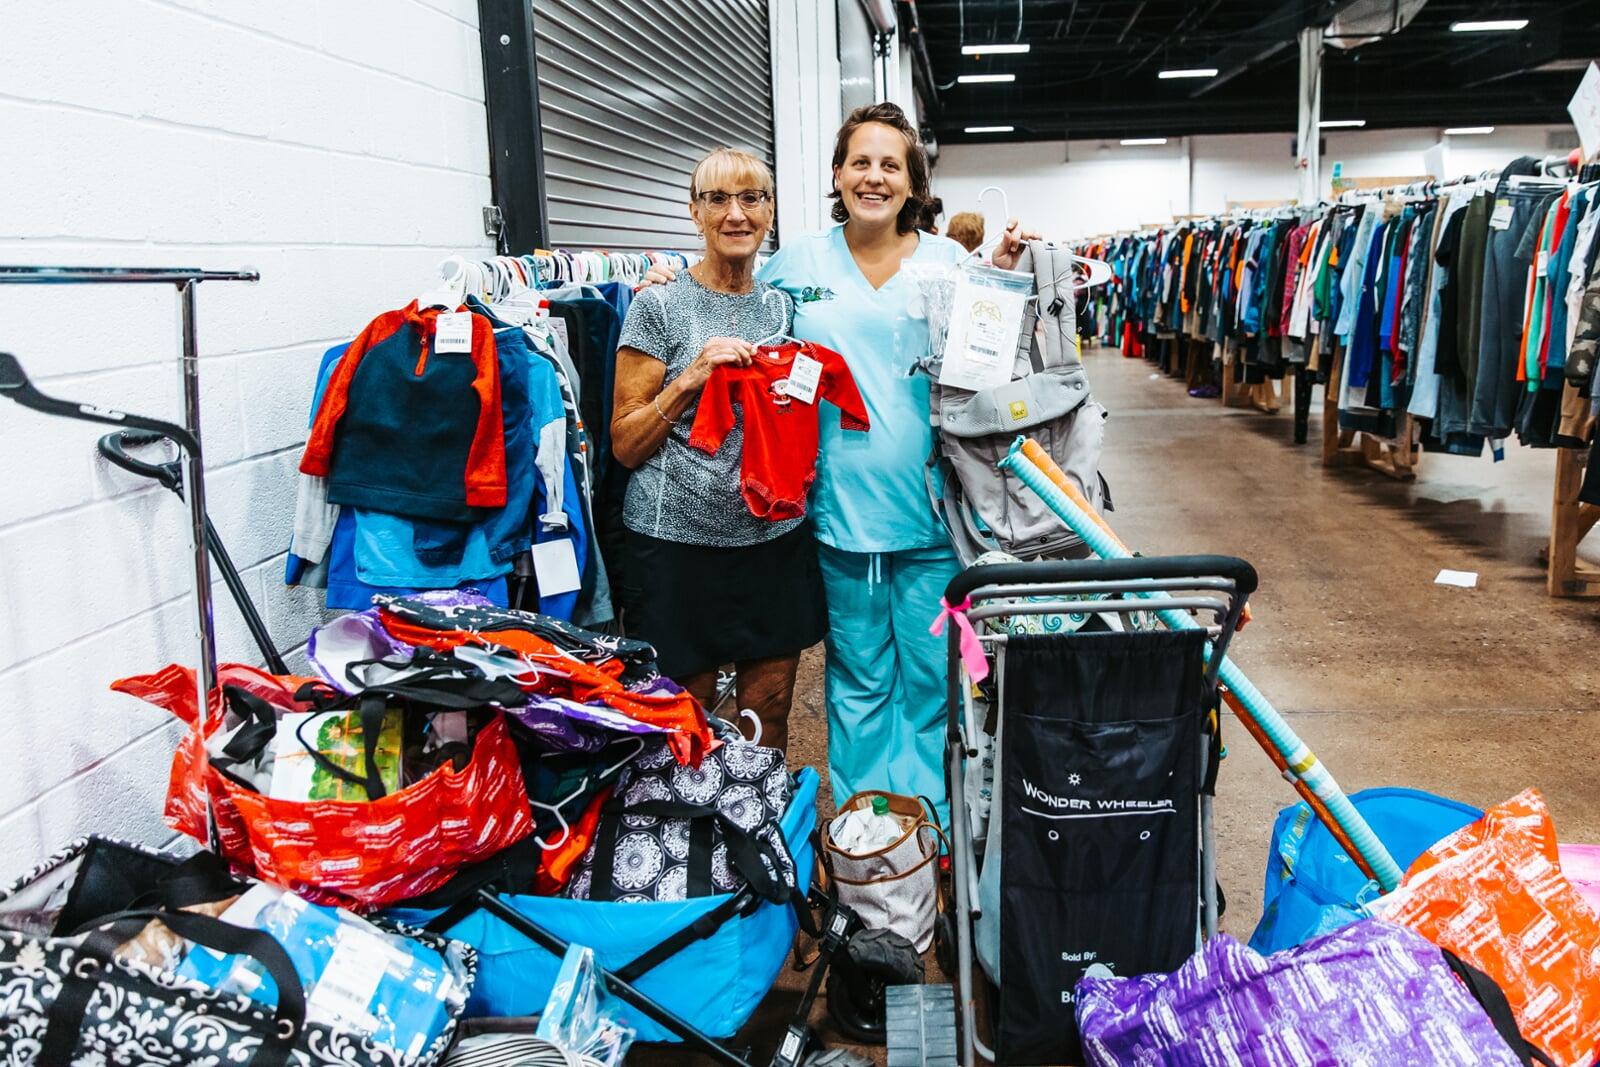 Two women are surrounded by bags, racks and carts of items they found while shopping at the JBF sale.